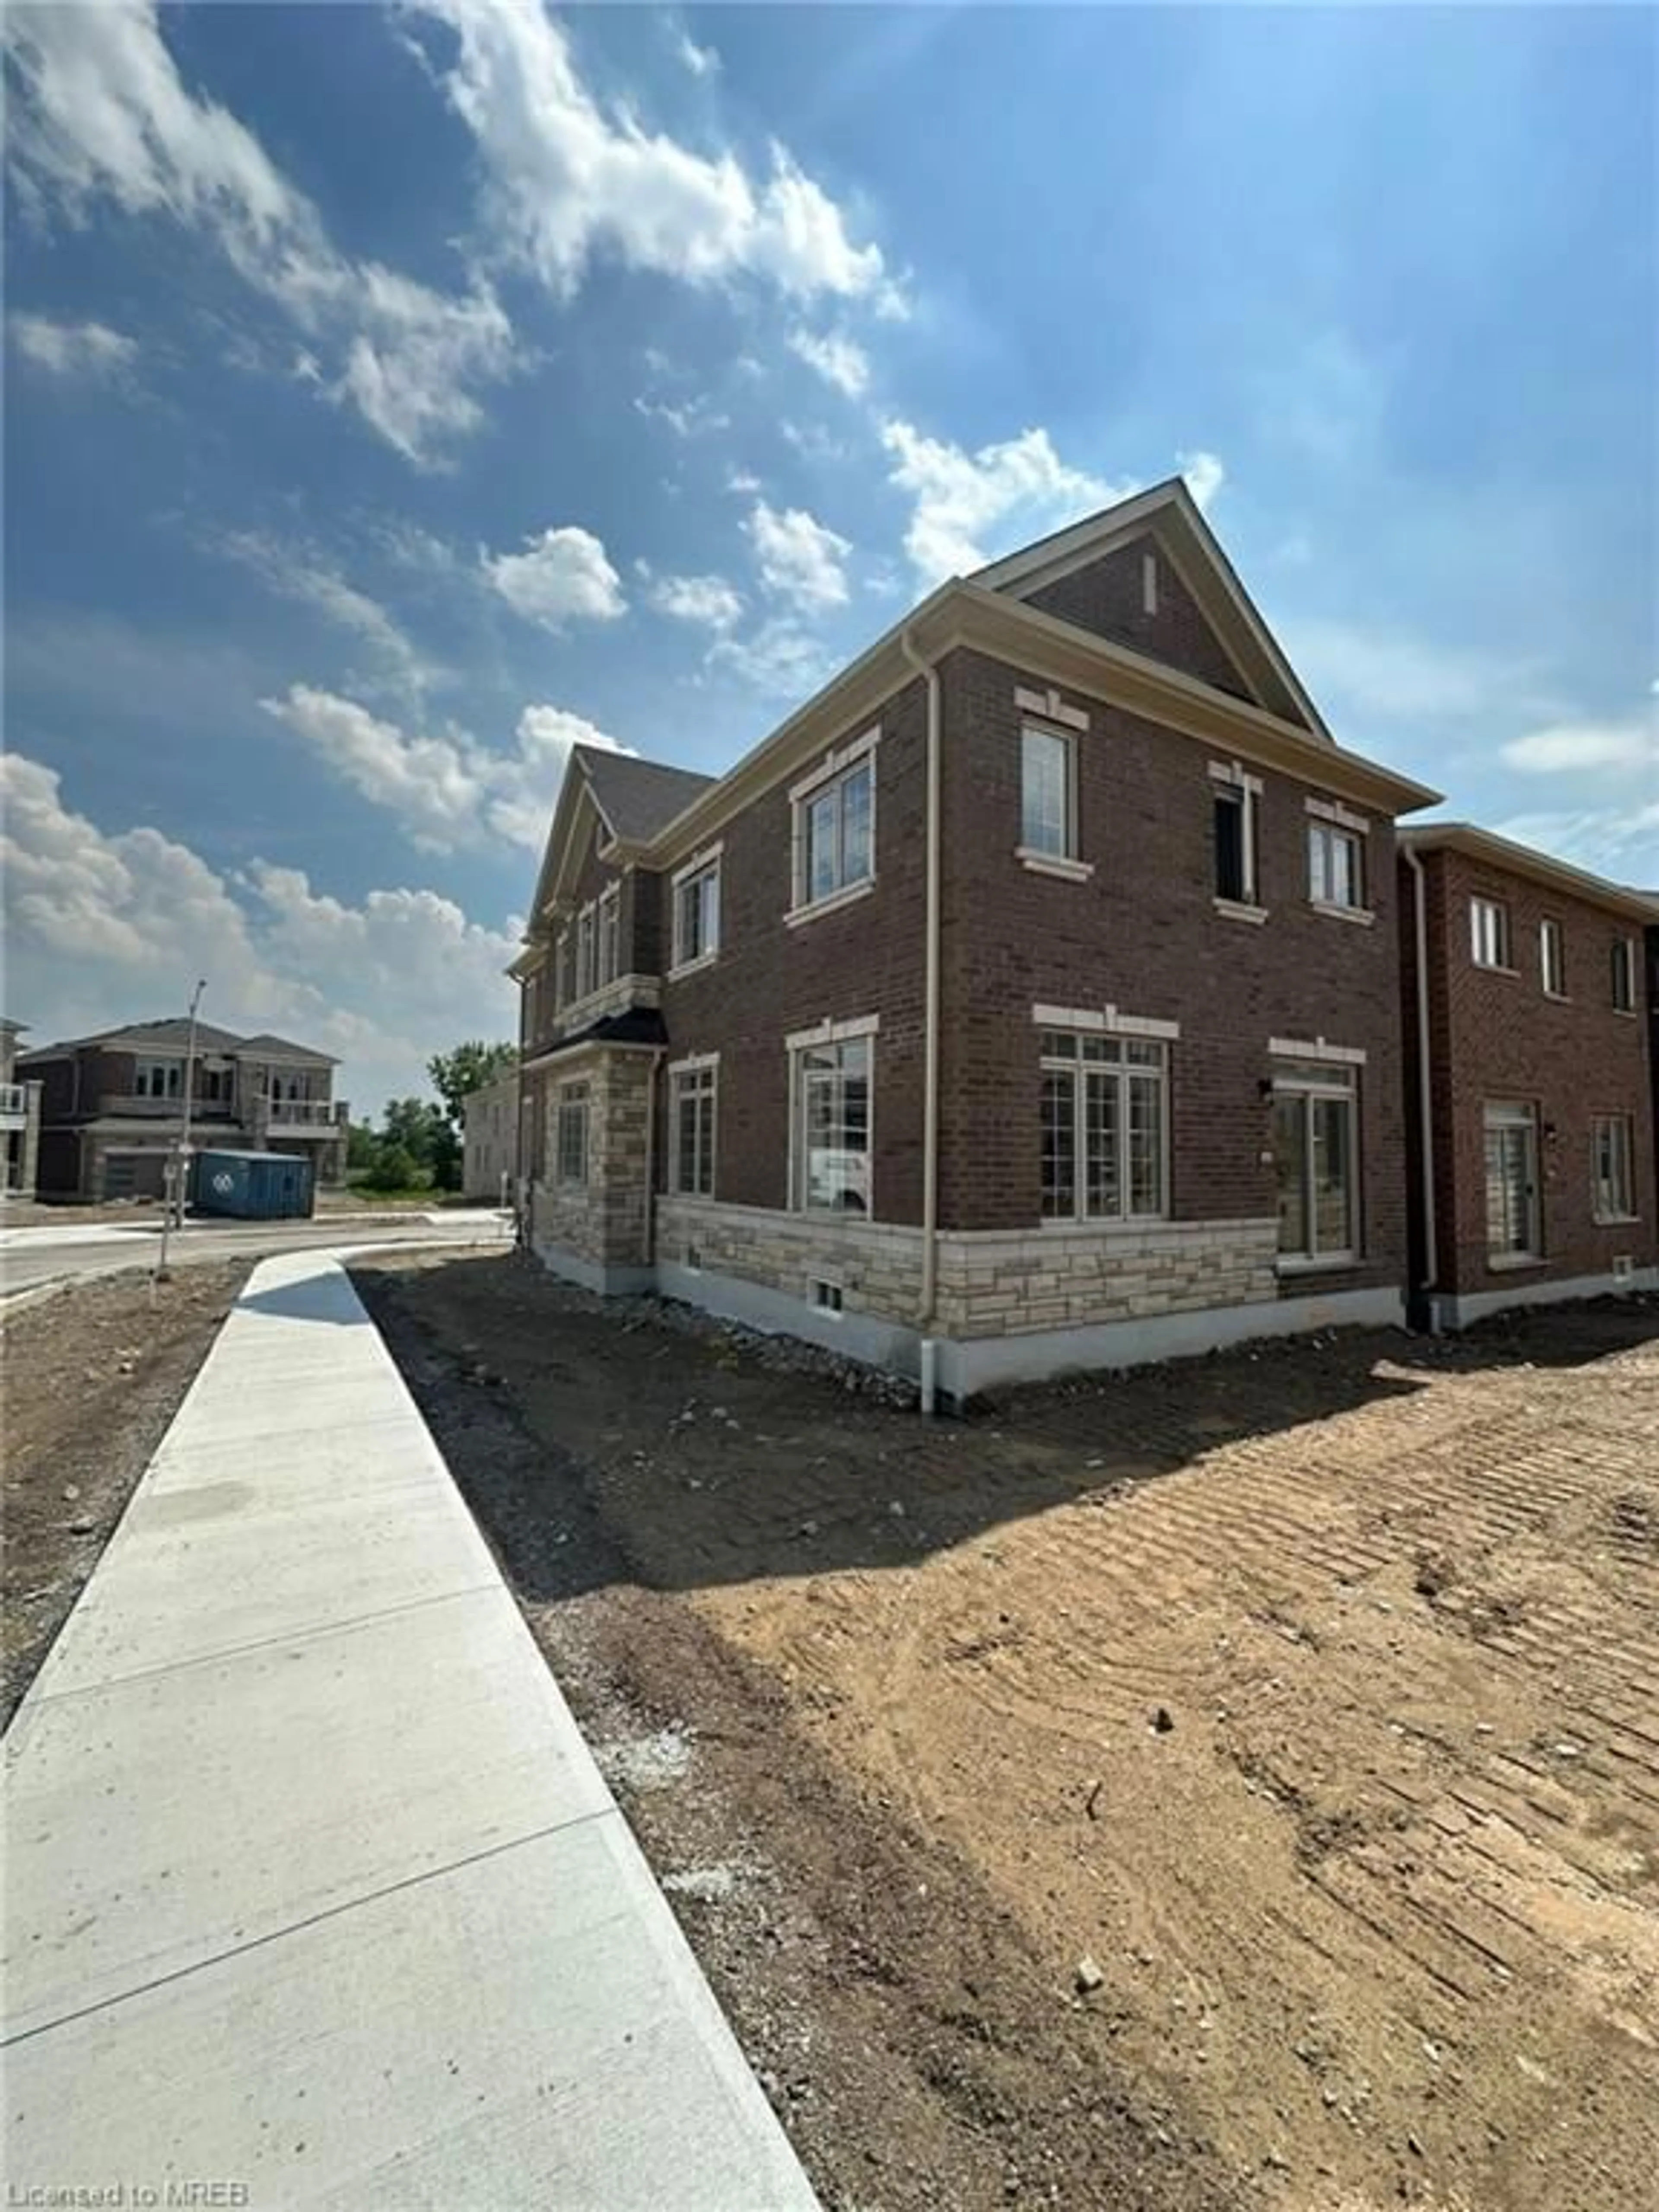 Home with brick exterior material for 67 Bloomfield Cres, Cambridge Ontario N1R 5S2